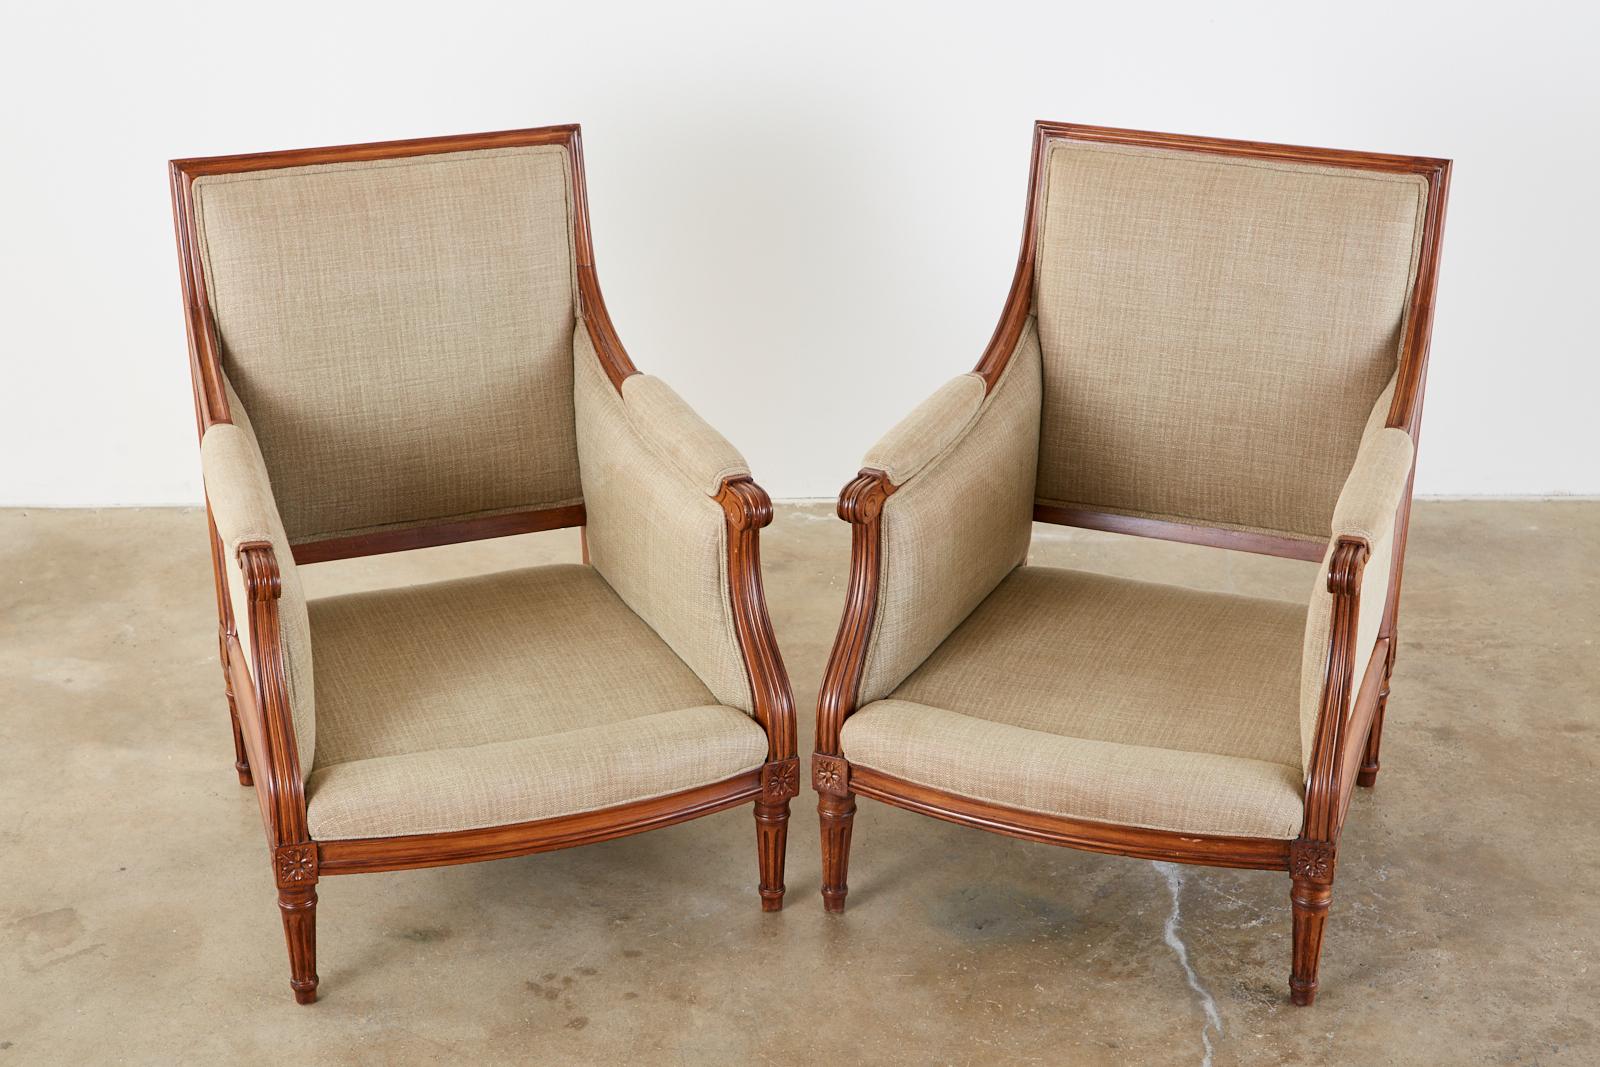 20th Century Pair of French Louis XVI Style Mahogany Bergère Armchairs